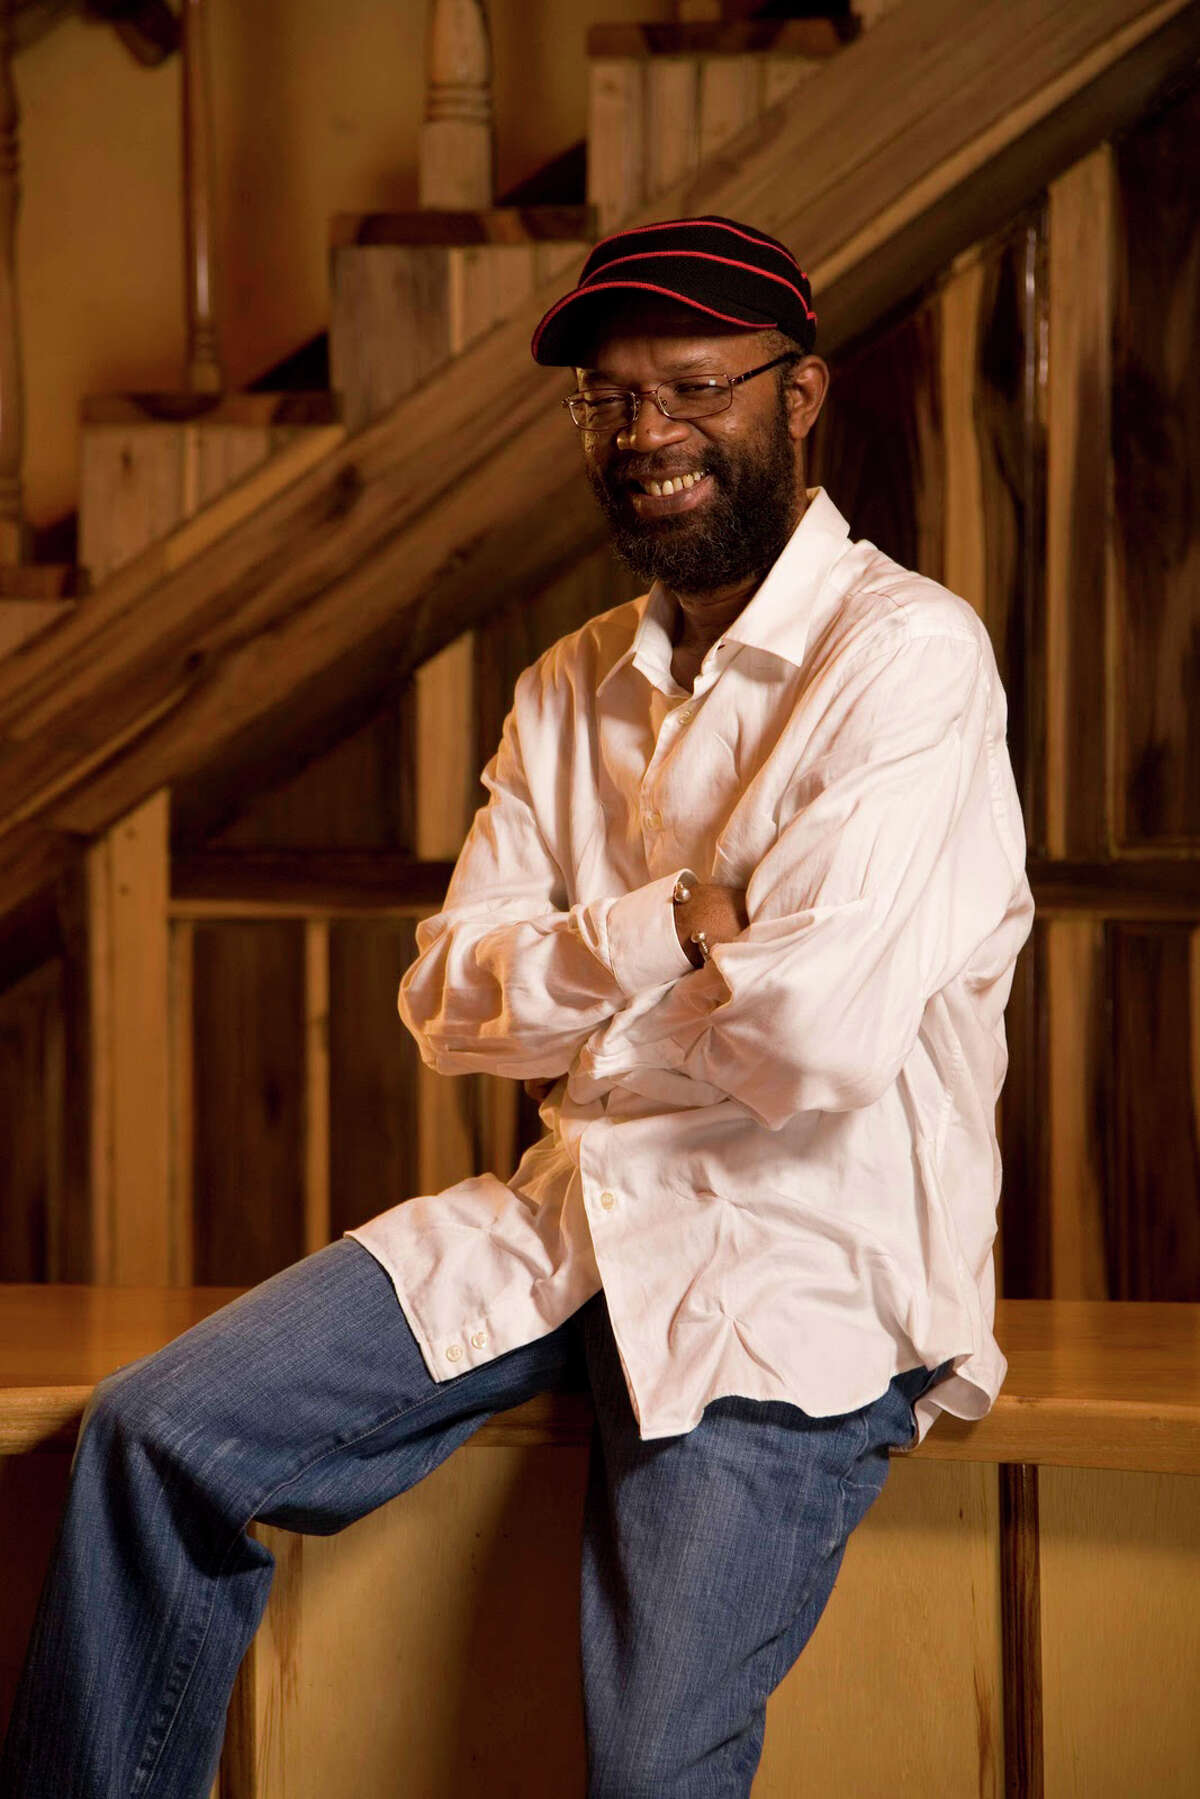 Beres Hammond, shown here, and Maxi Priest will be among the performers Saturday, Aug. 10, at the annual Westside Reggae Festival at Ives Concert Park in Danbury.